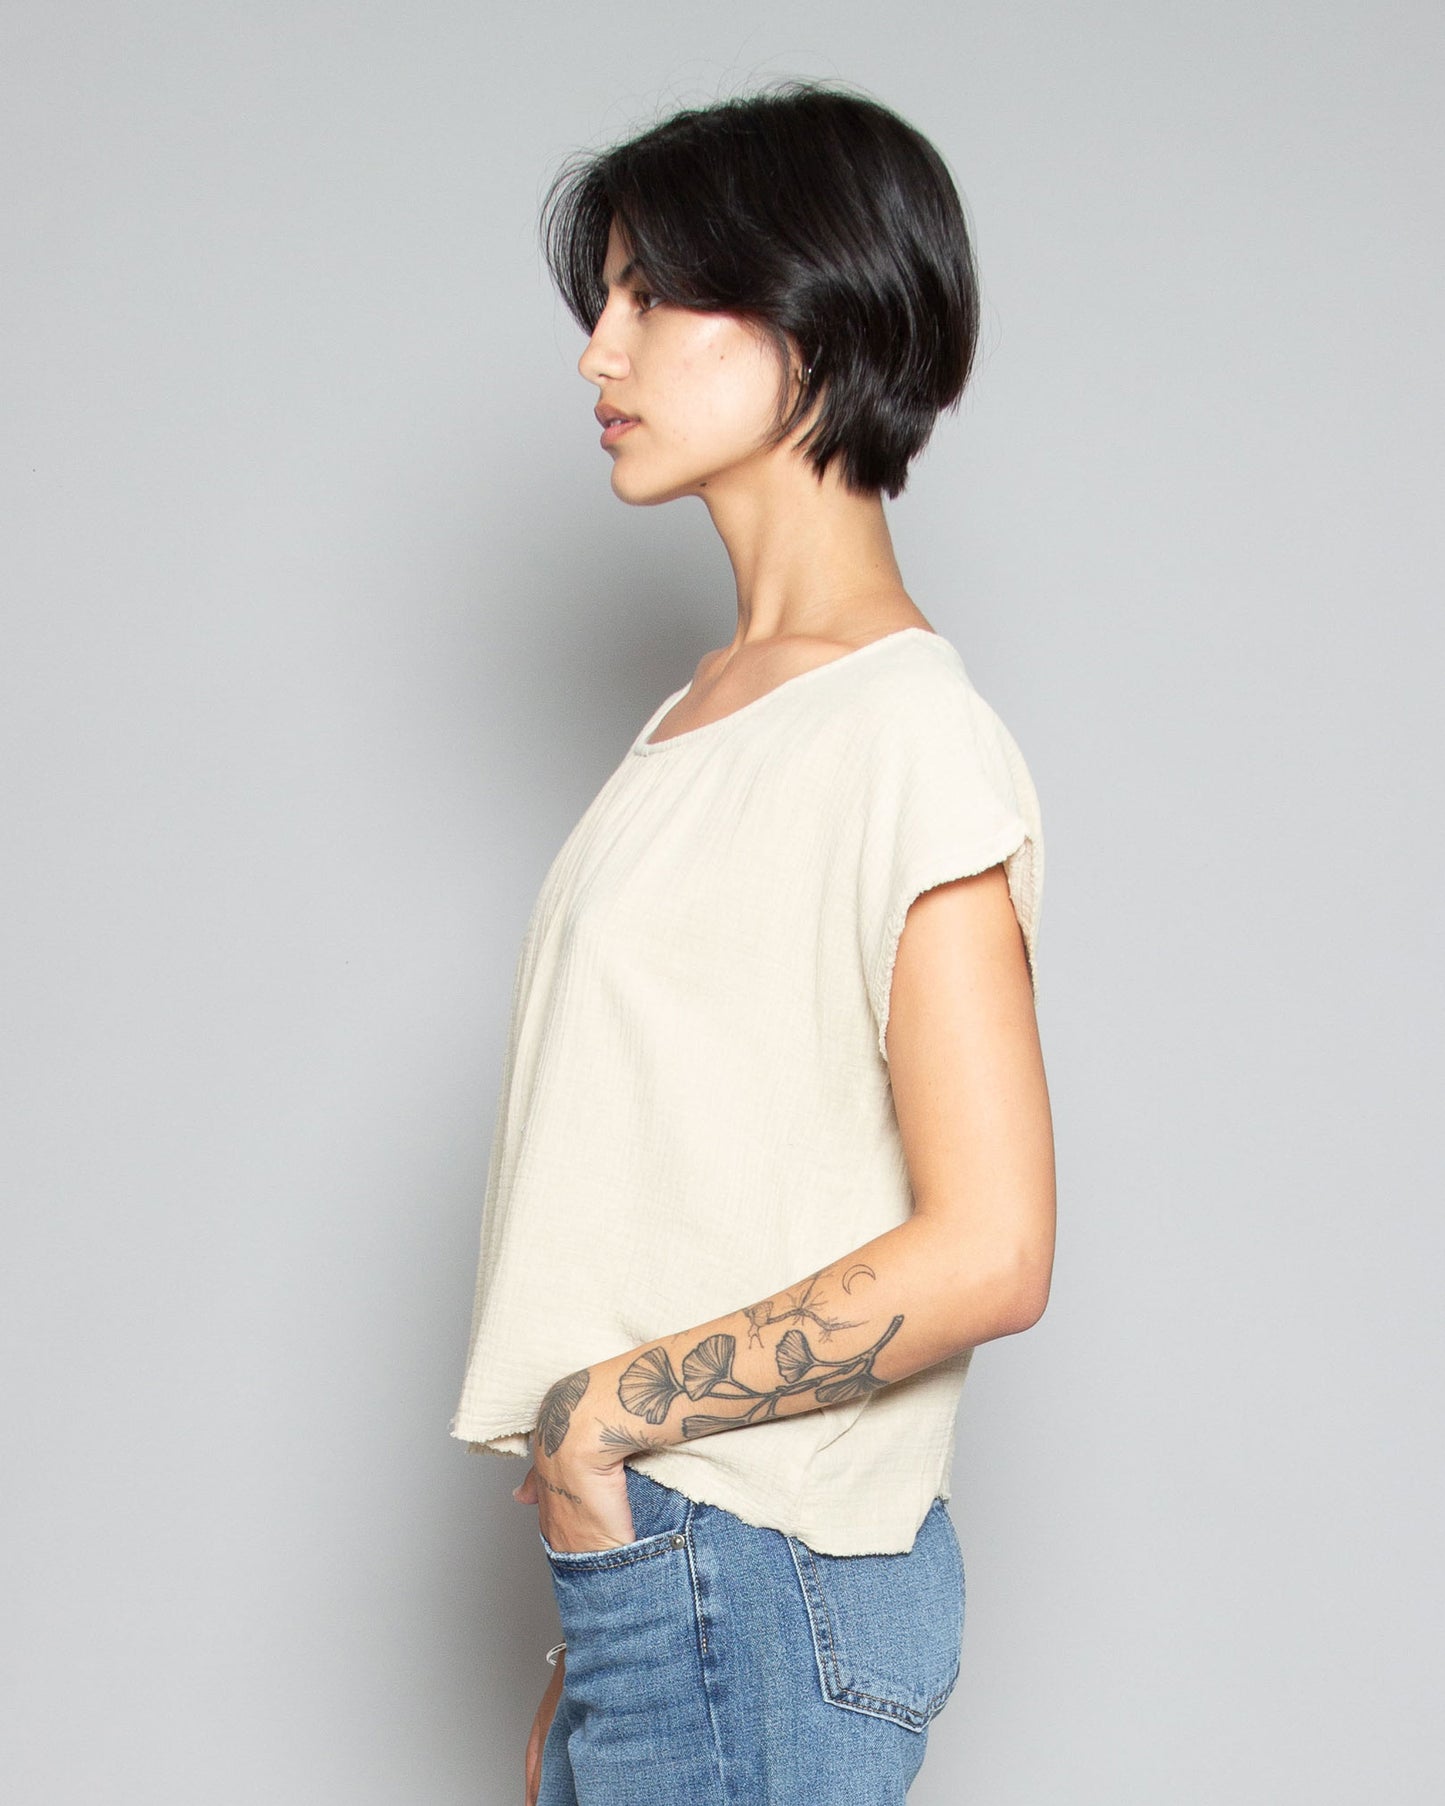 PERSONS Odessa Top in Parchment available at Lahn.shop